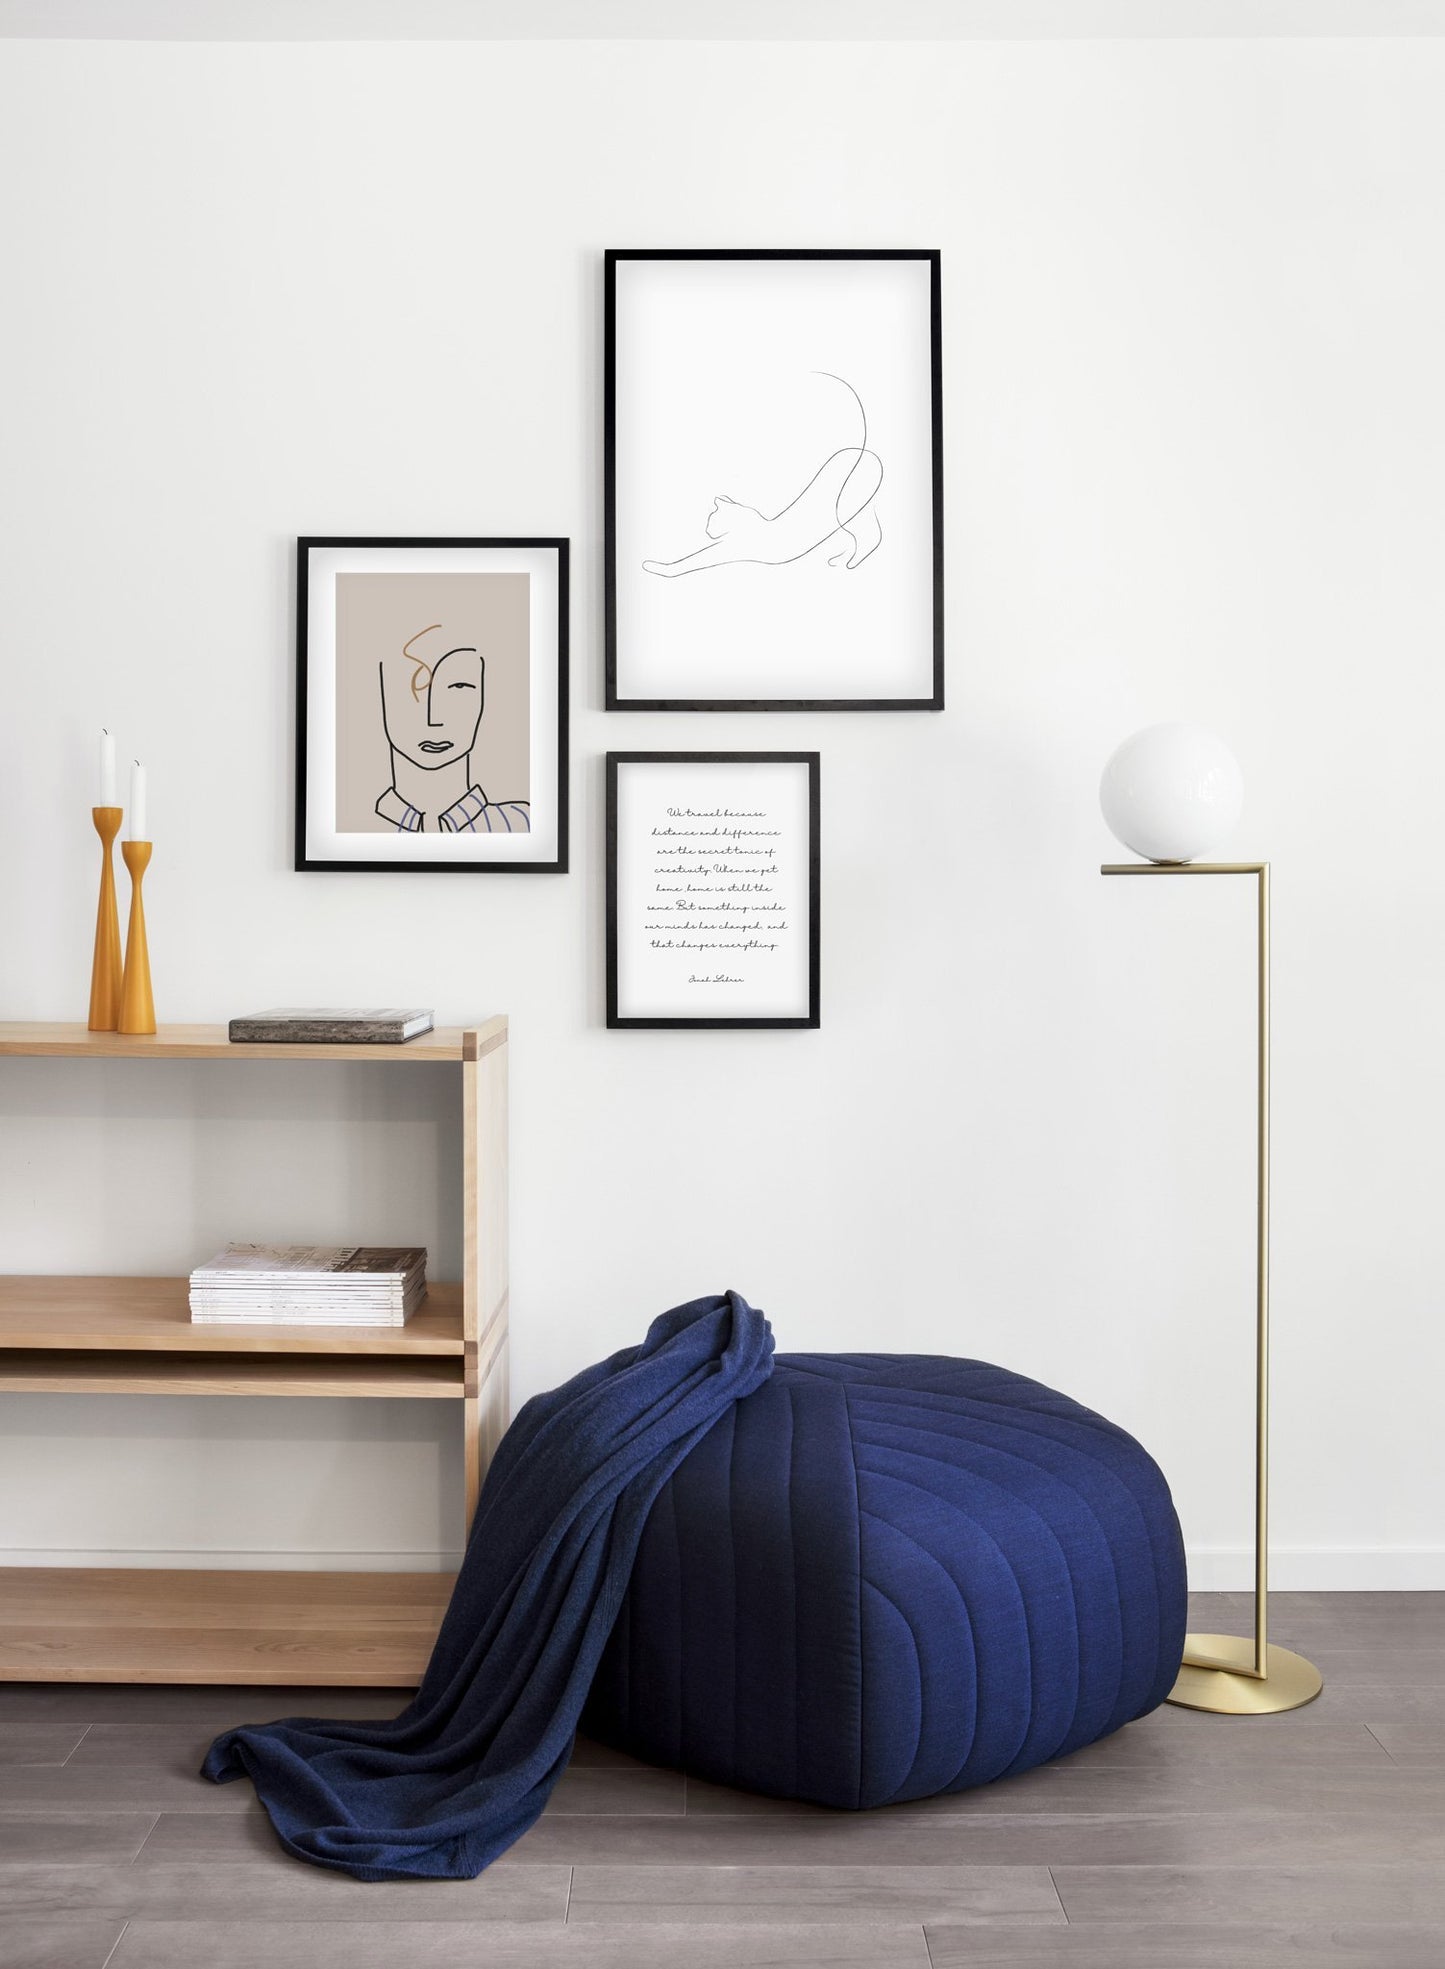 Modern minimalist poster by Opposite Wall with abstract illustration of stretching cat line art - Gallery wall trio - Living Room